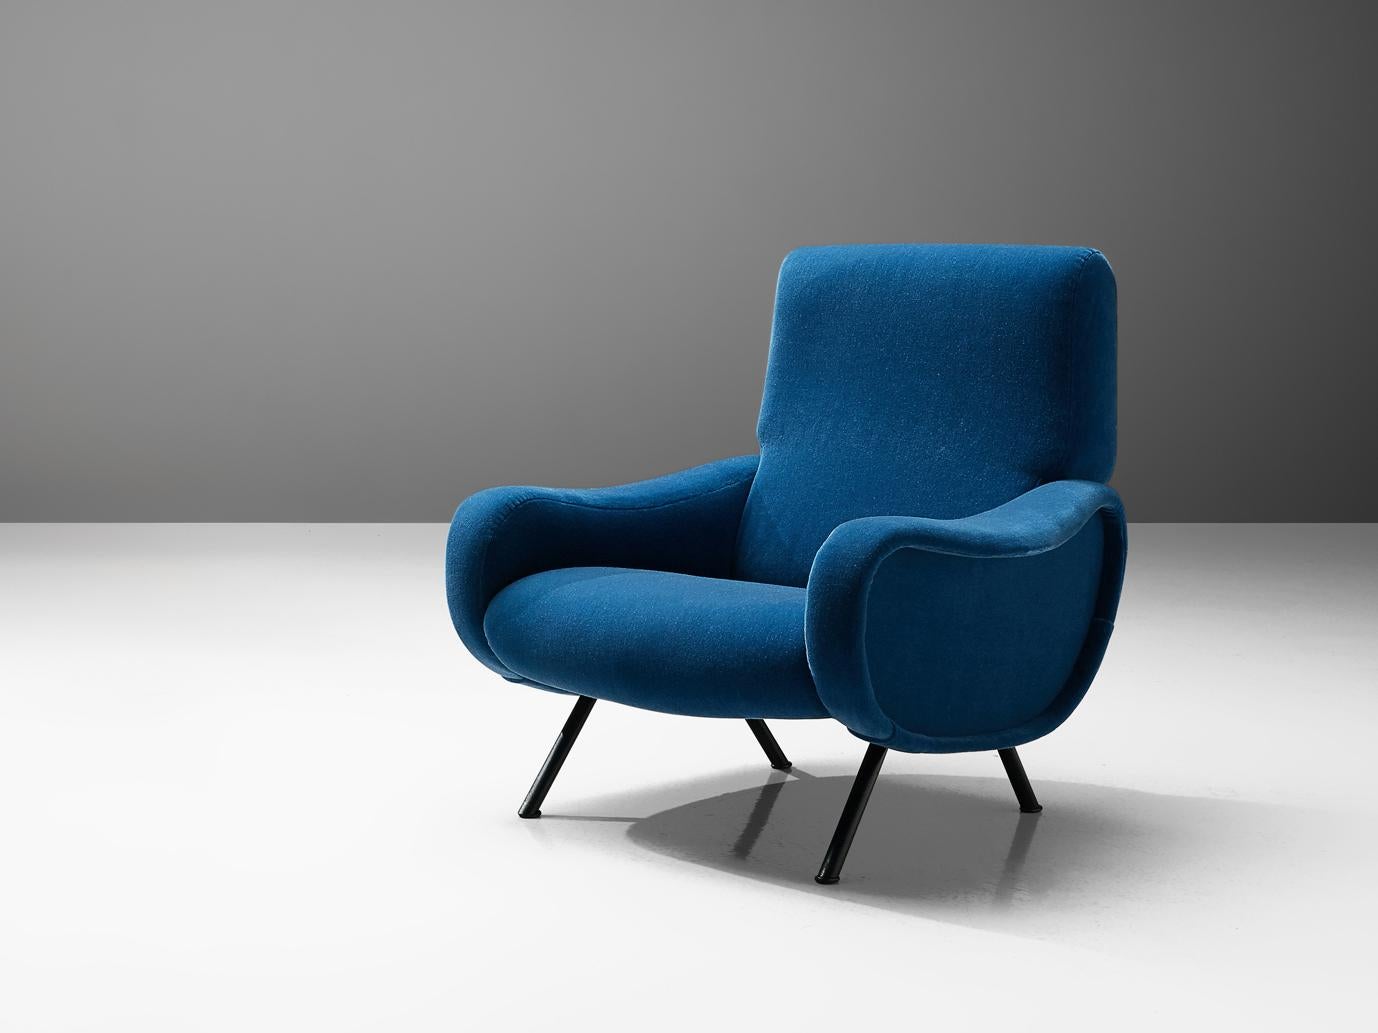 Marco Zanuso for Arflex, reupholstered lounge chair, fabric, metal, Italy, 1950s

An icon of 1950s’ Italian Design, the 'Lady' armchair is appreciated for its contemporary construction, a symbol of innovation supreme, in terms of style, materials,